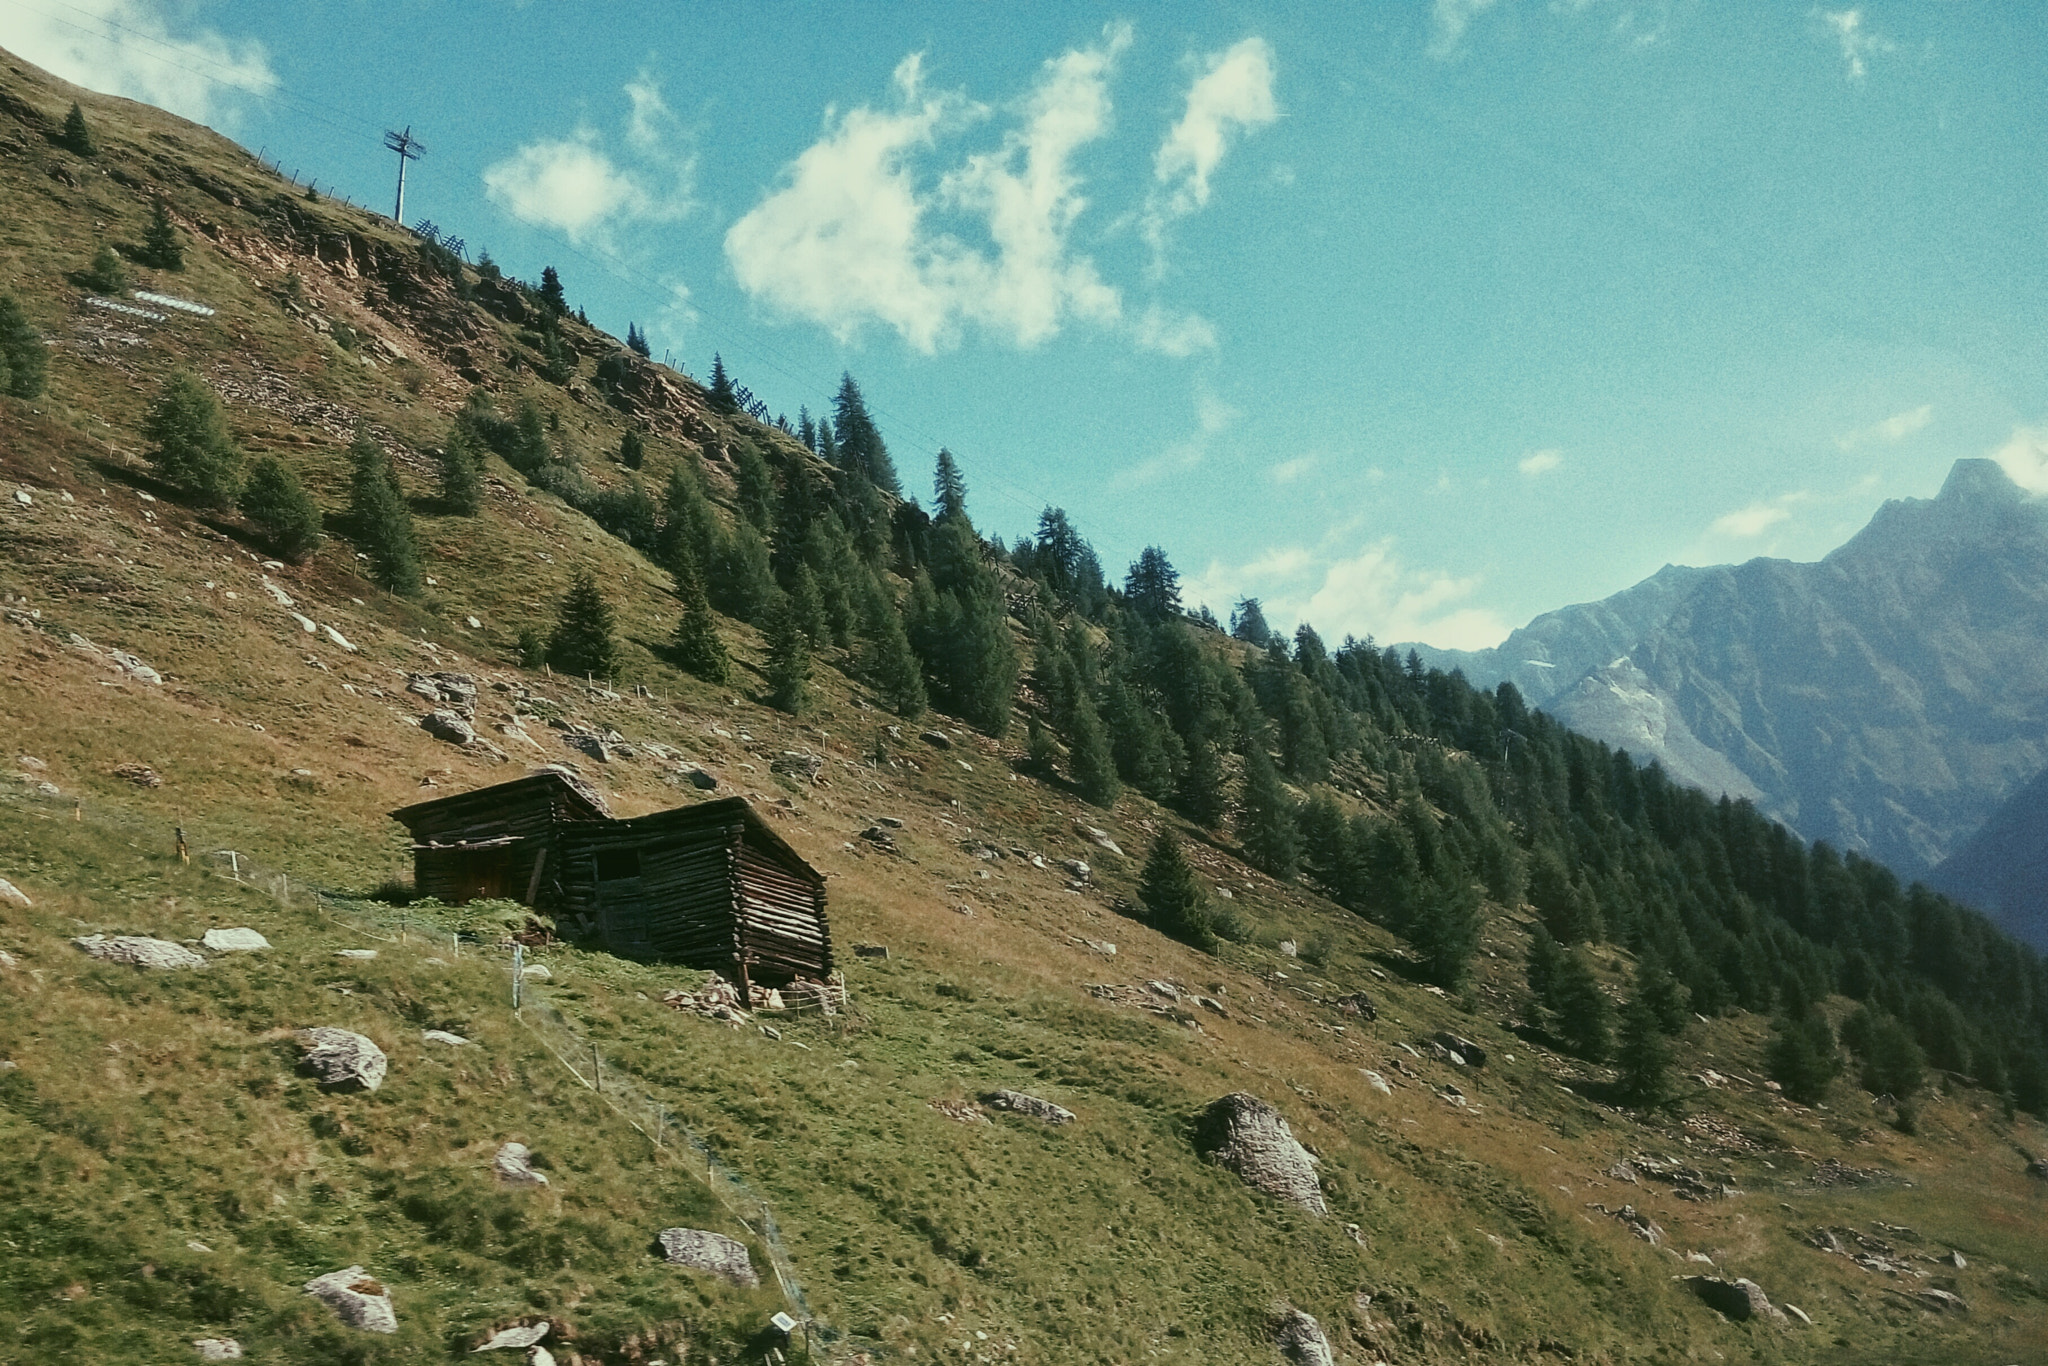 Meizu m2 note sample photo. Small cabin in alps. photography